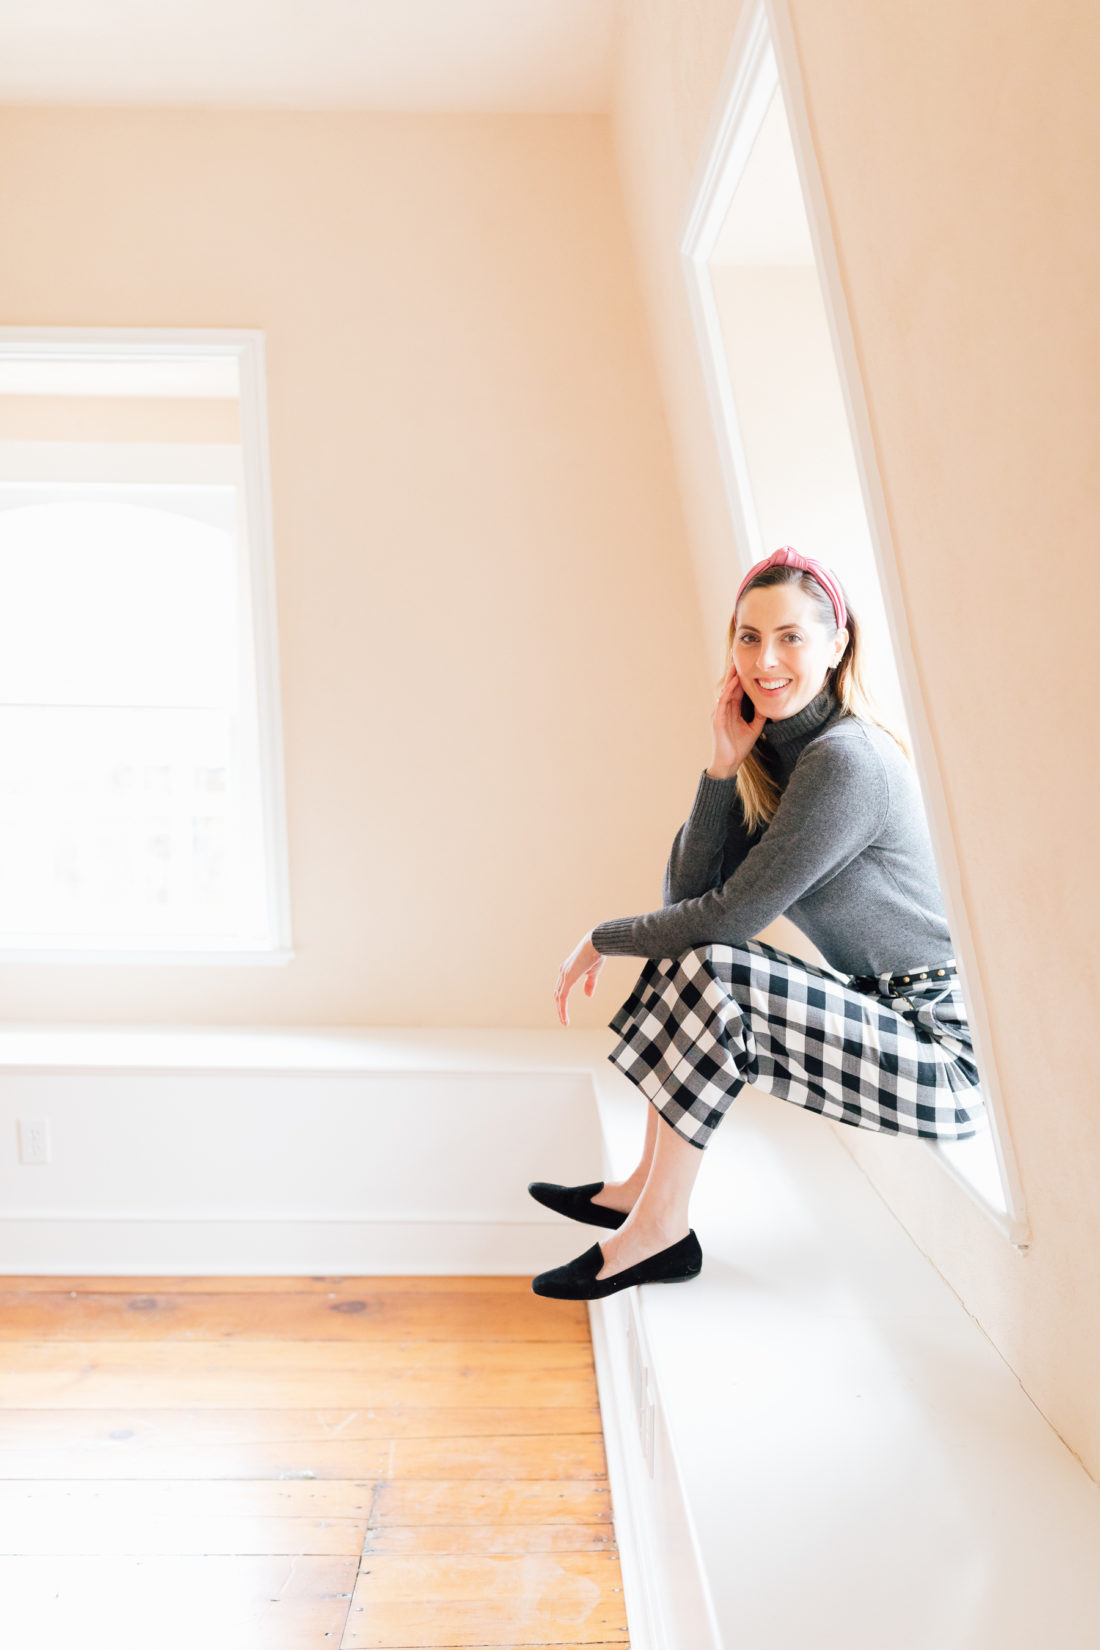 Eva Amurri Martino wears checked trousers and a grey cashmere sweater, and sits in her empty home that awaits renovations